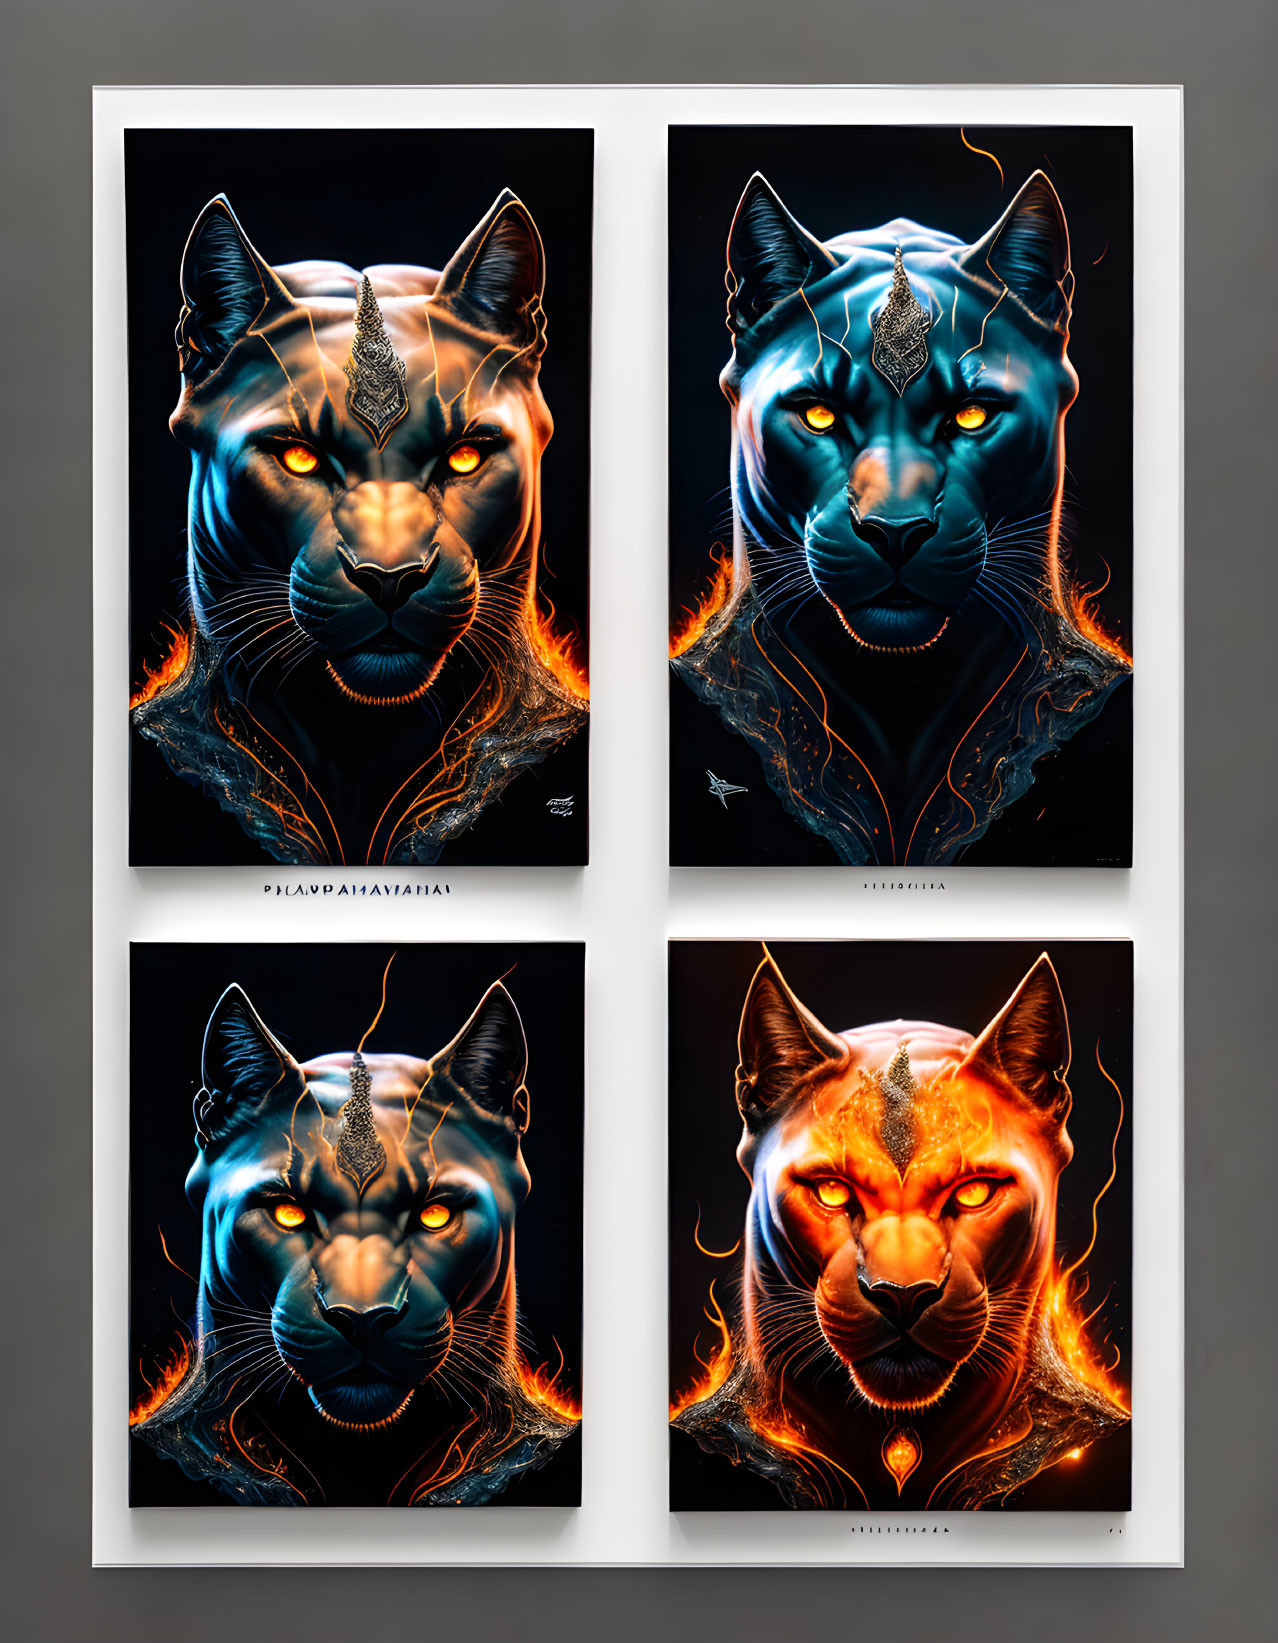 Artistic Panther Face Illustrations with Neon Tribal Patterns on Dark Background